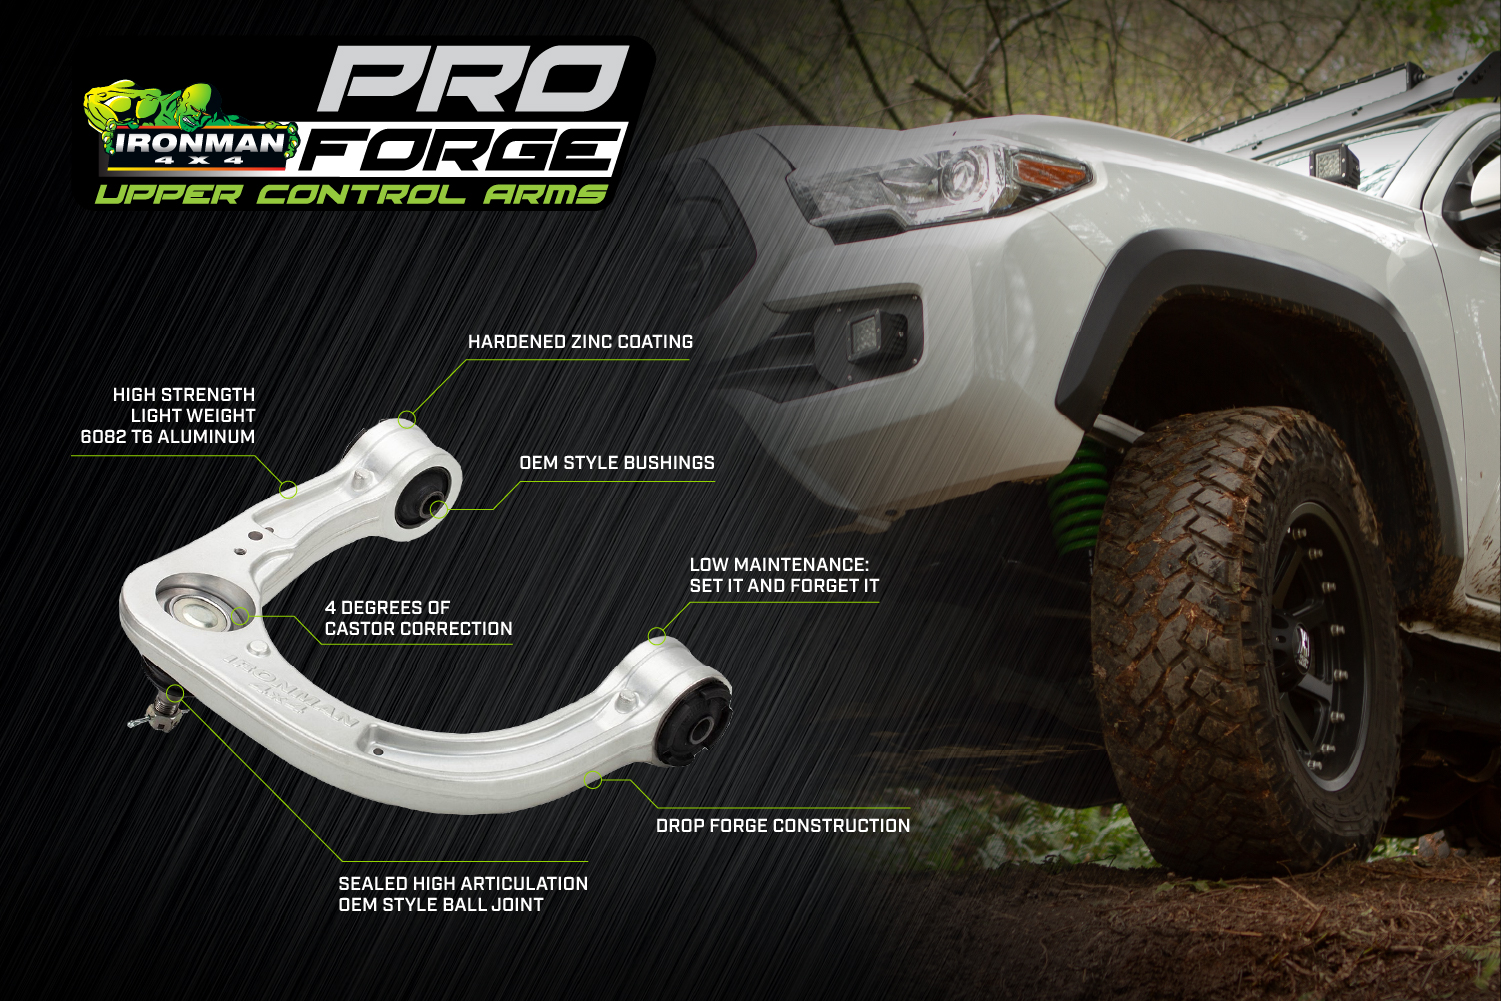 Pro Forge Upper Control Arms Suited For 2005+ Toyota Tacoma Questions & Answers